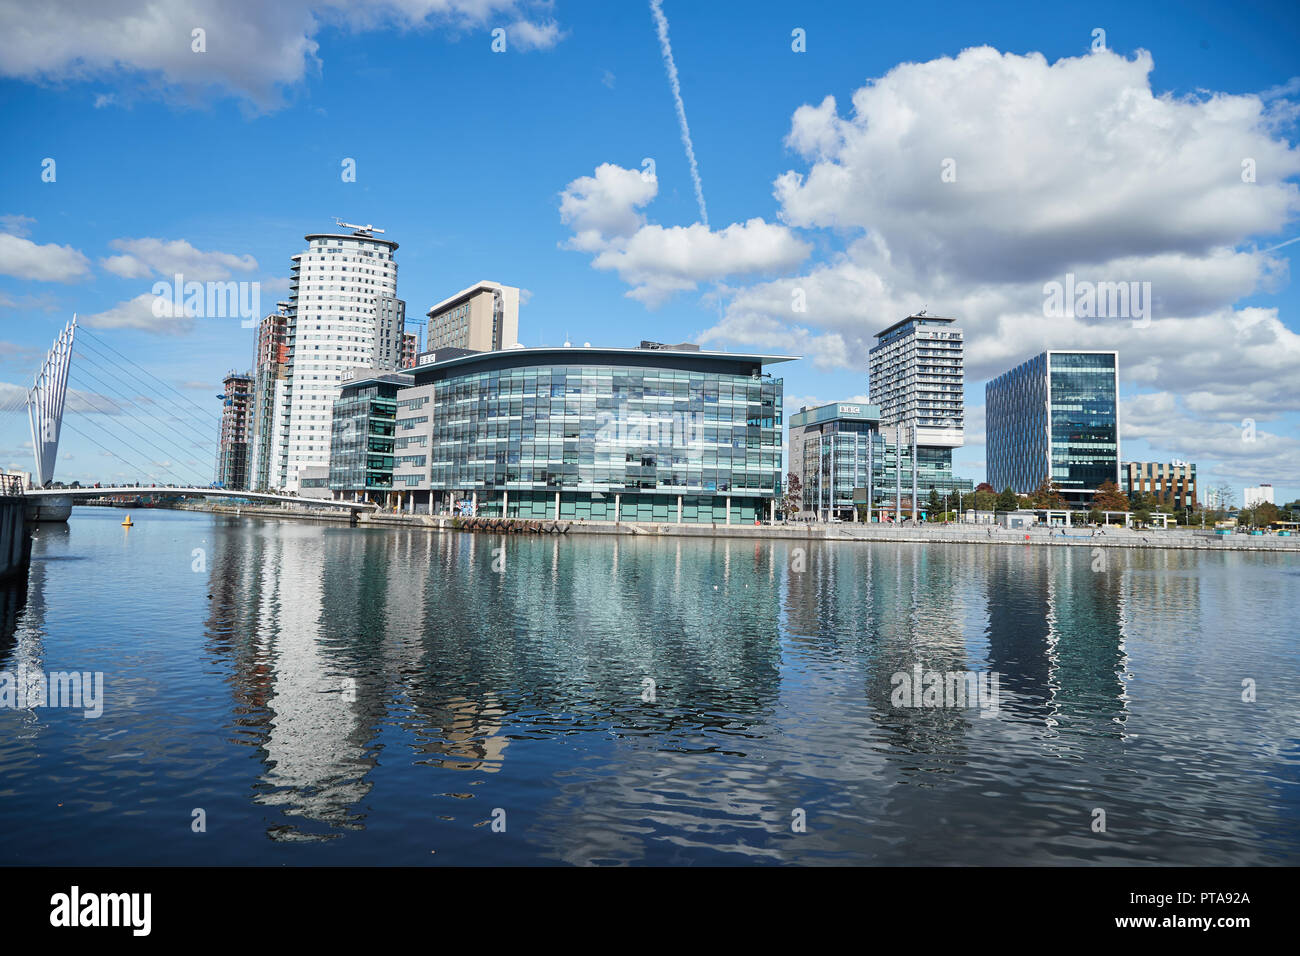 The BBC and other buildings at MediaCity UK, Salford Quays, Manchester, UK Stock Photo